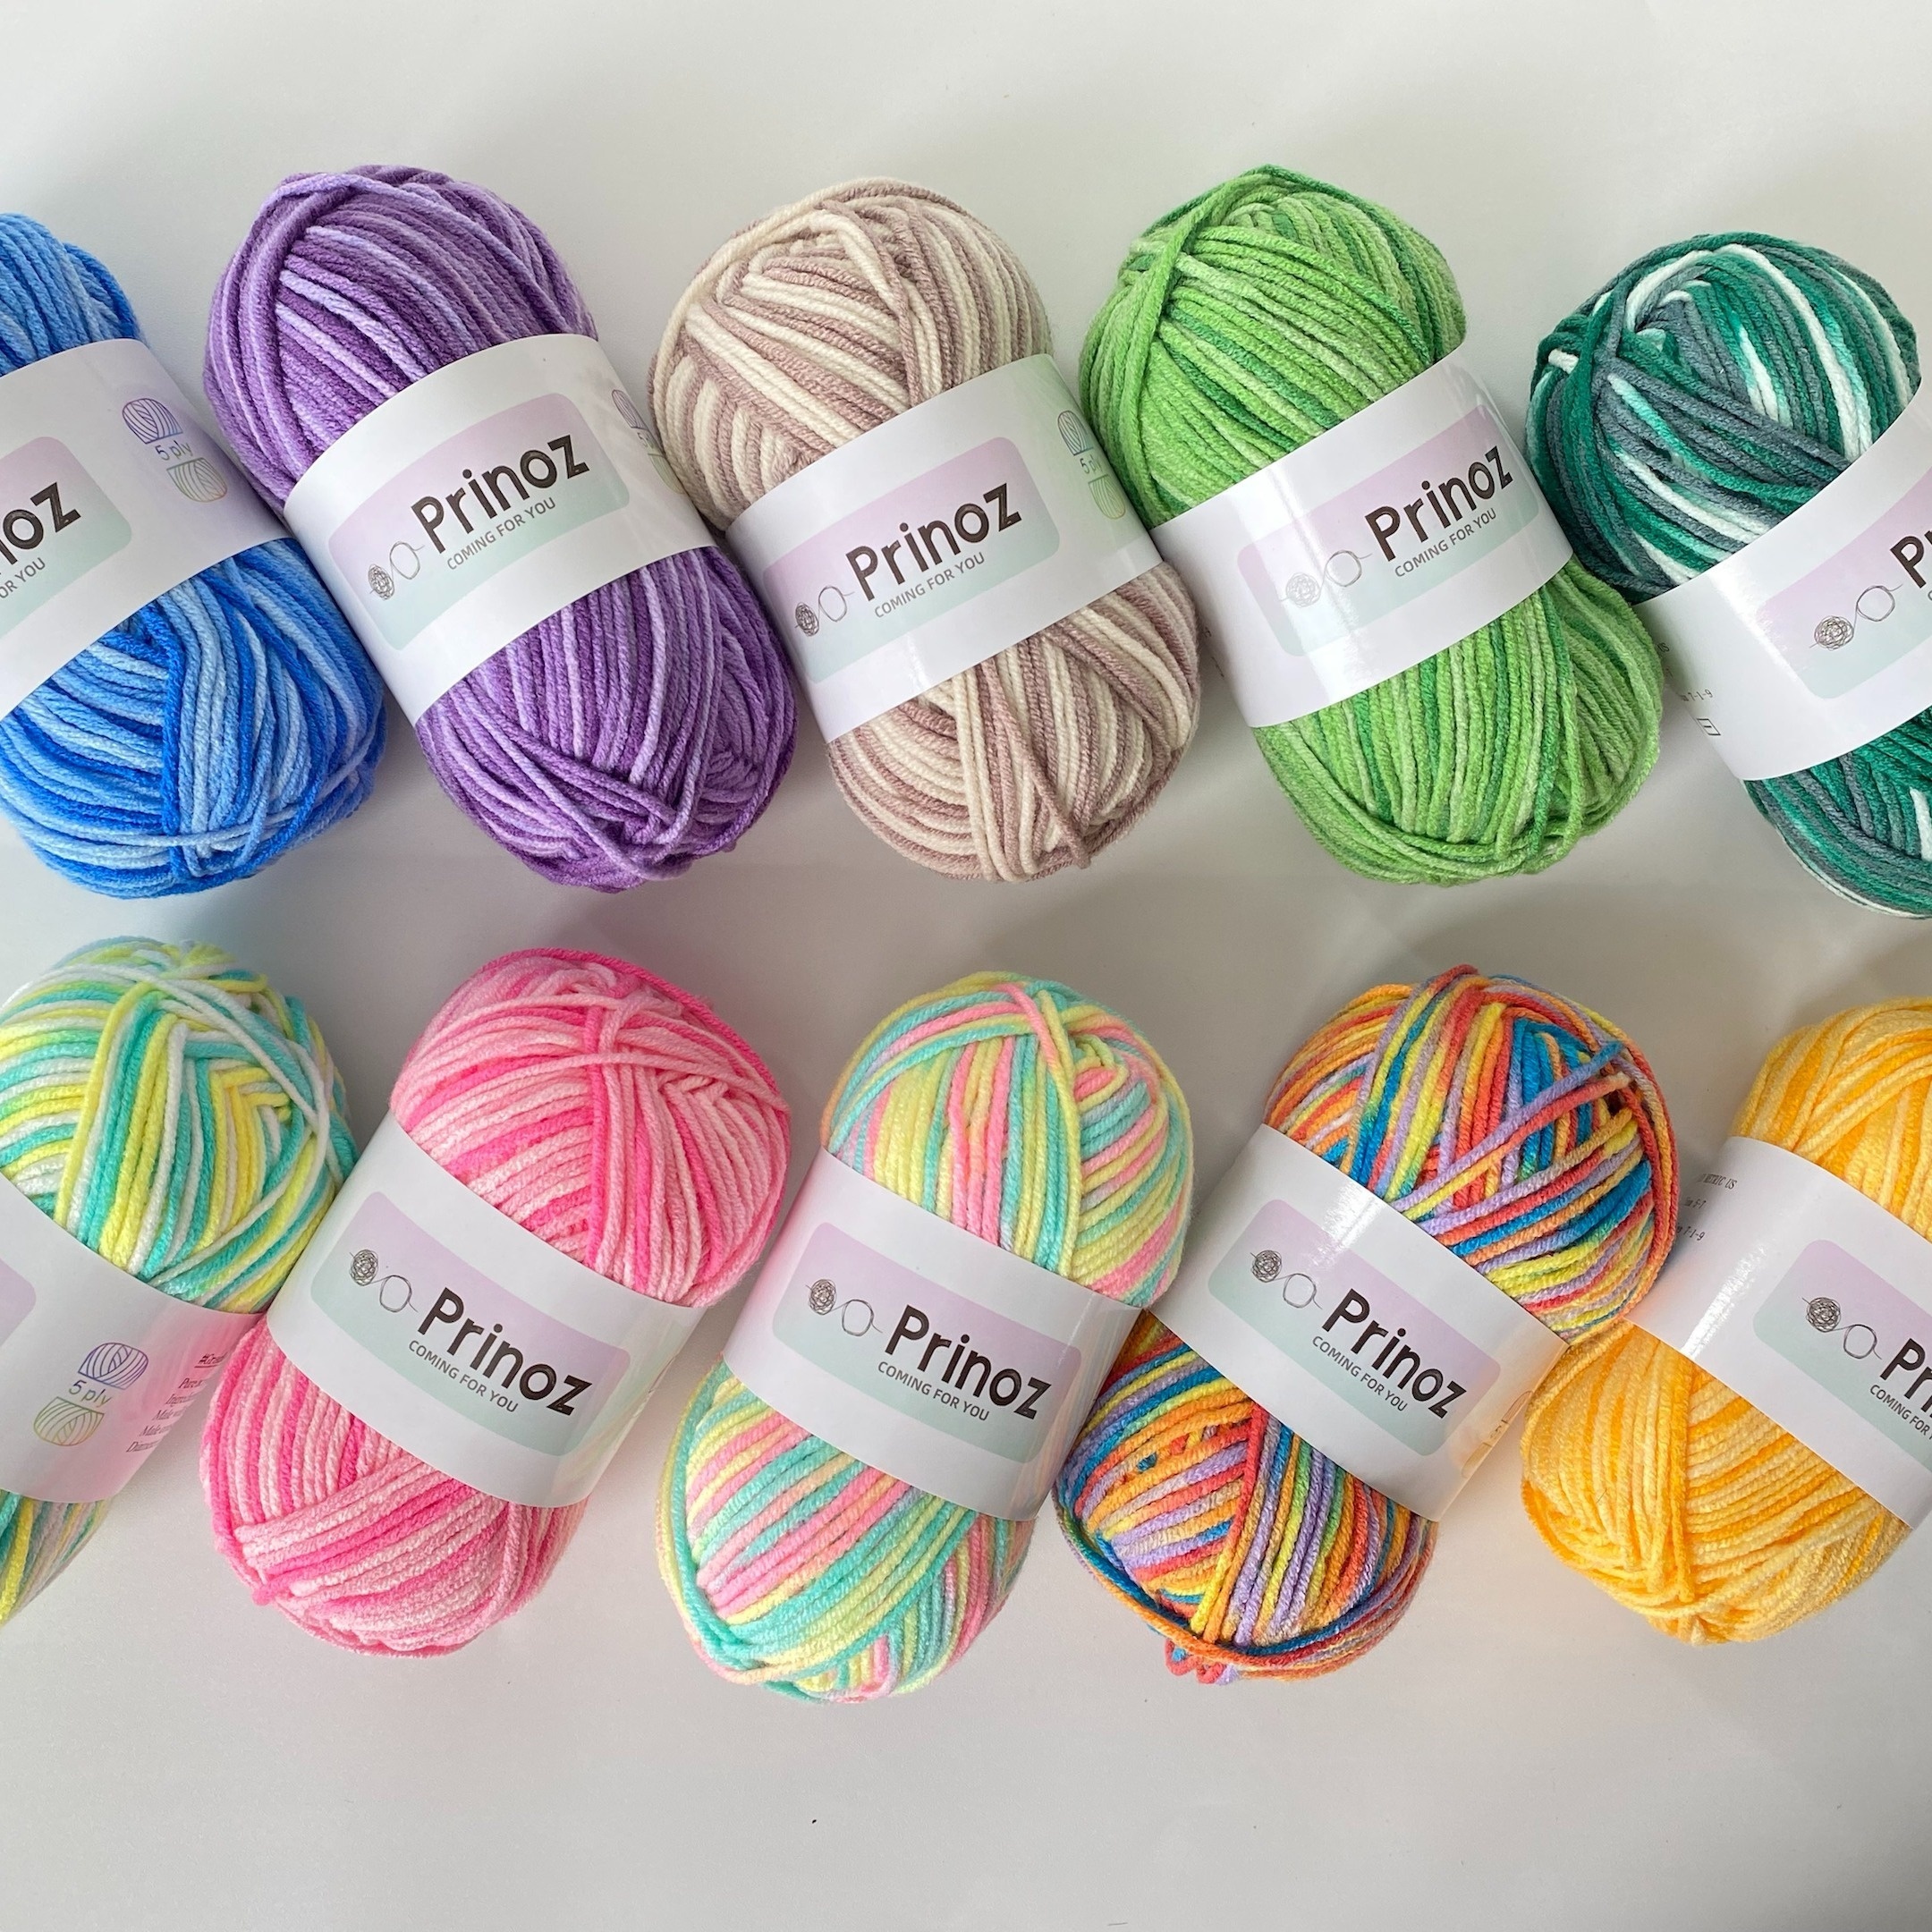 A tangled bundle of colorful yarn for knitting or crocheting on Craiyon